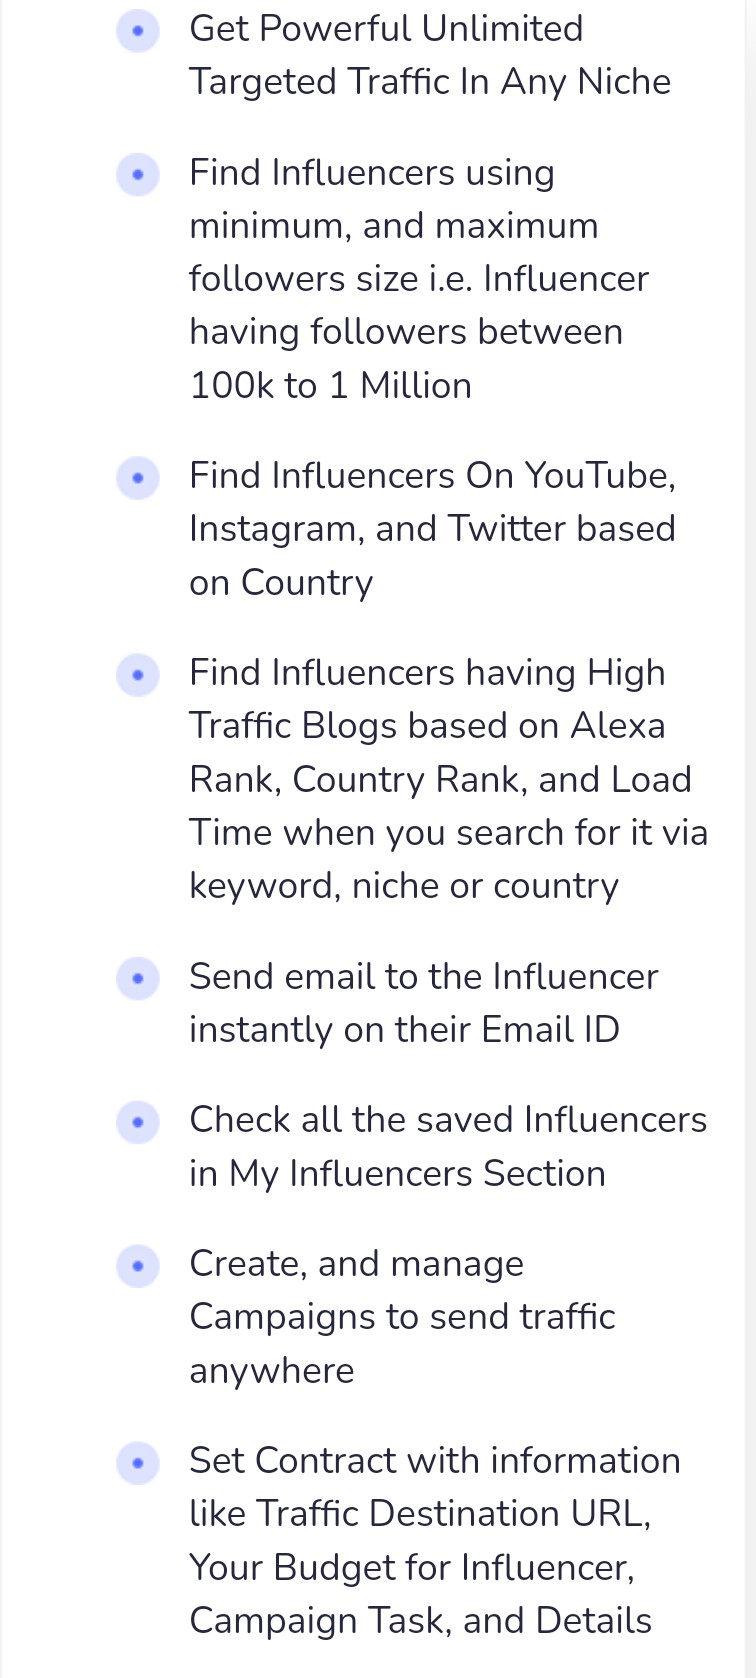 screenshot 20201219 000625 FREE VIDEO Showing How To Get Unlimited Targeted Traffic from YouTubeTM, InstagramTM, TwitterTM, and High-Traffic Popular Blogs In Any Niche from Top Influencers using influencerhub